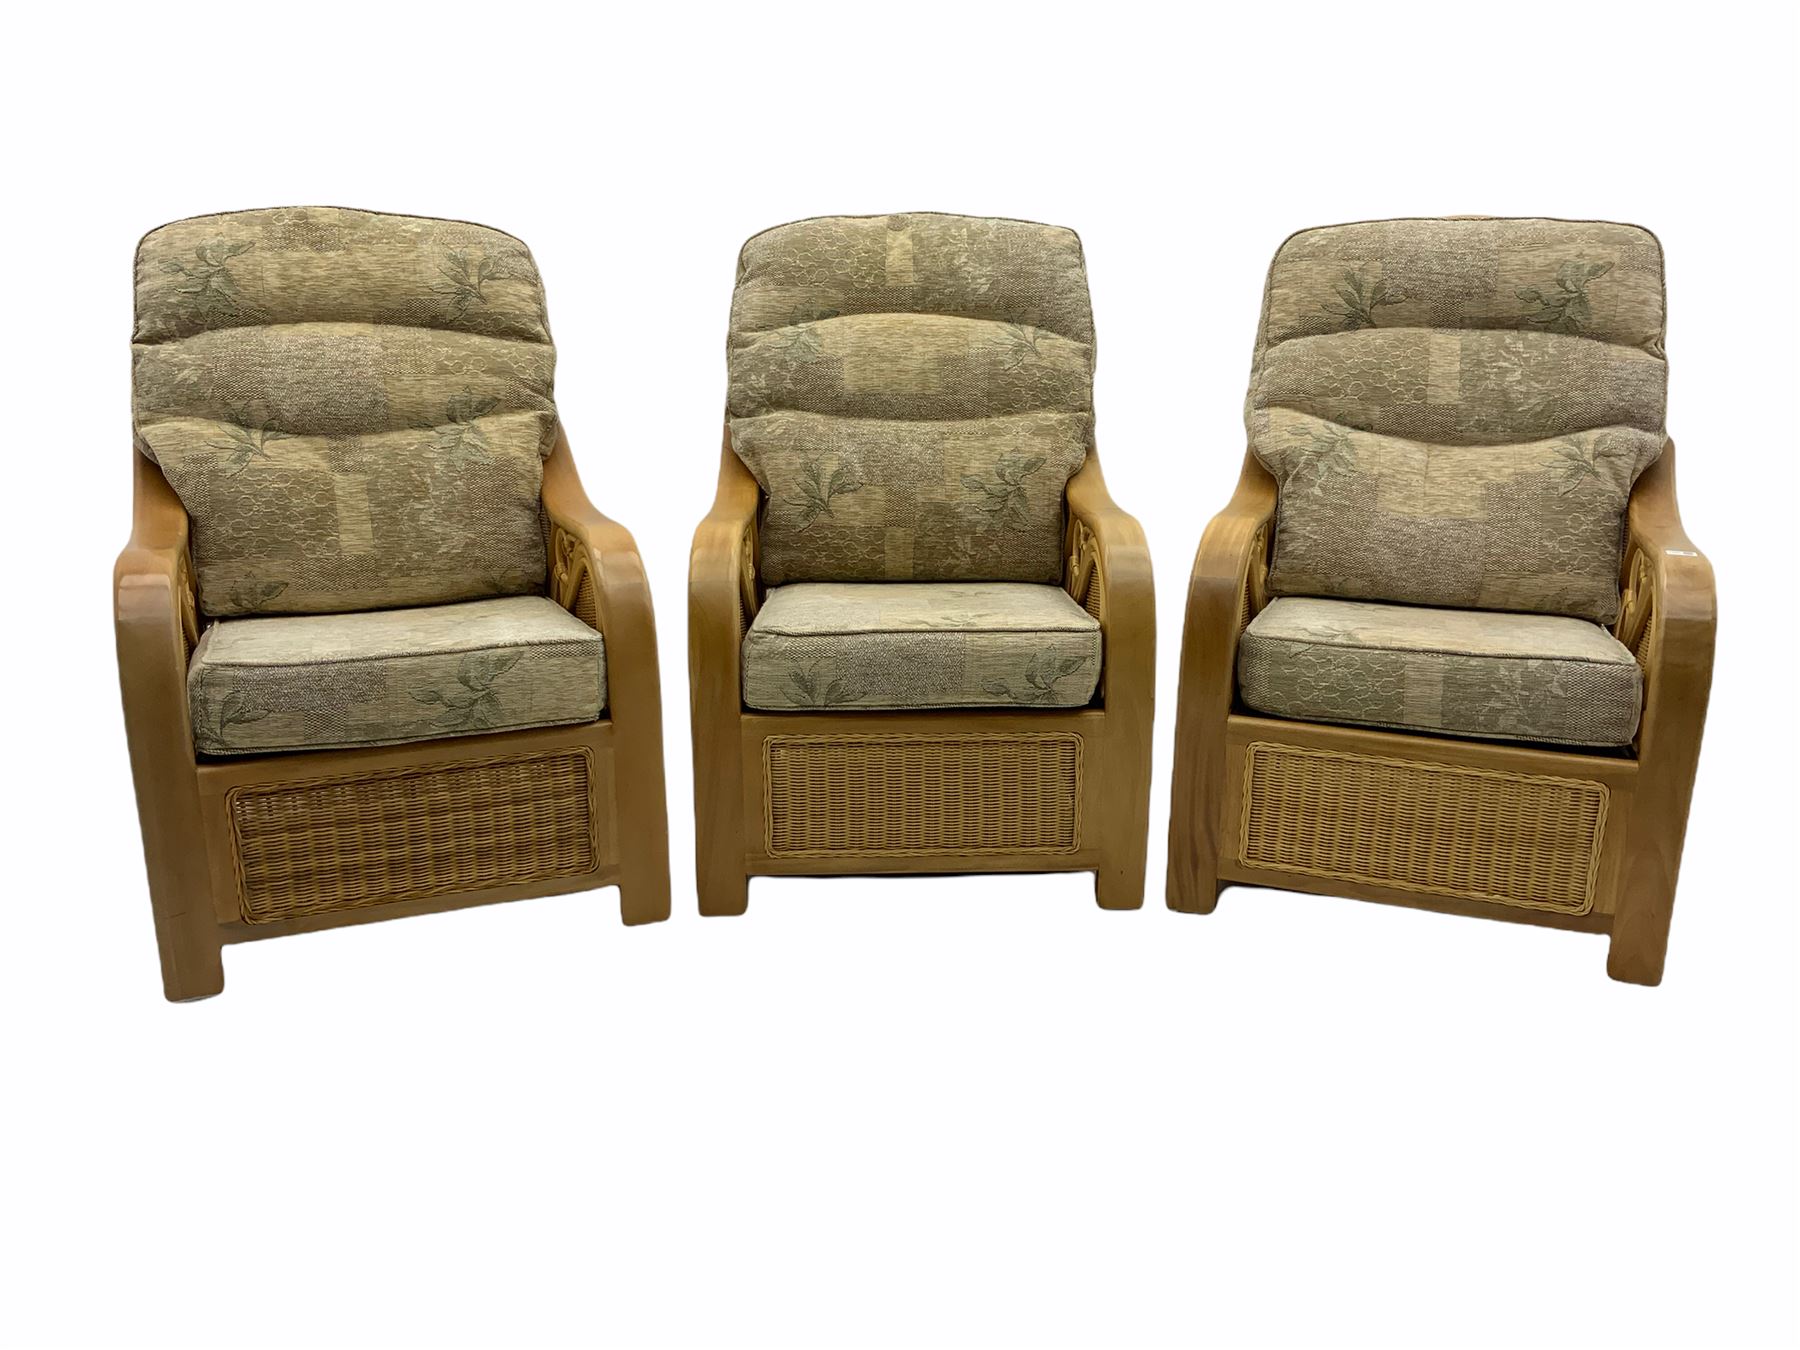 Three light wood and cane conservatory armchairs